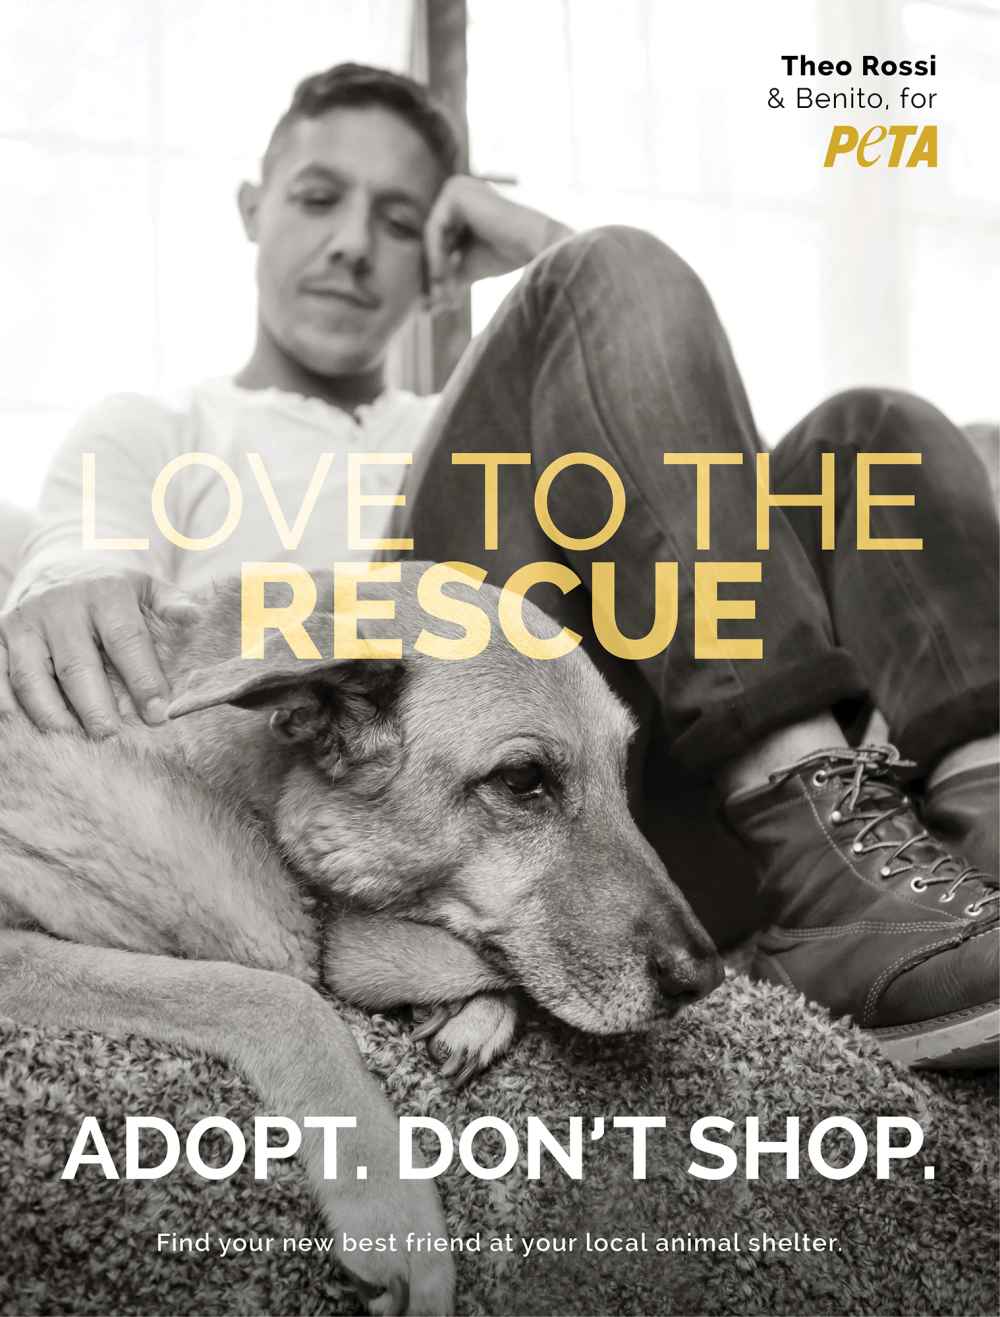 Theo Rossi and His Rescue Dog Benito Team Up With PETA to Encourage Pet Adoption